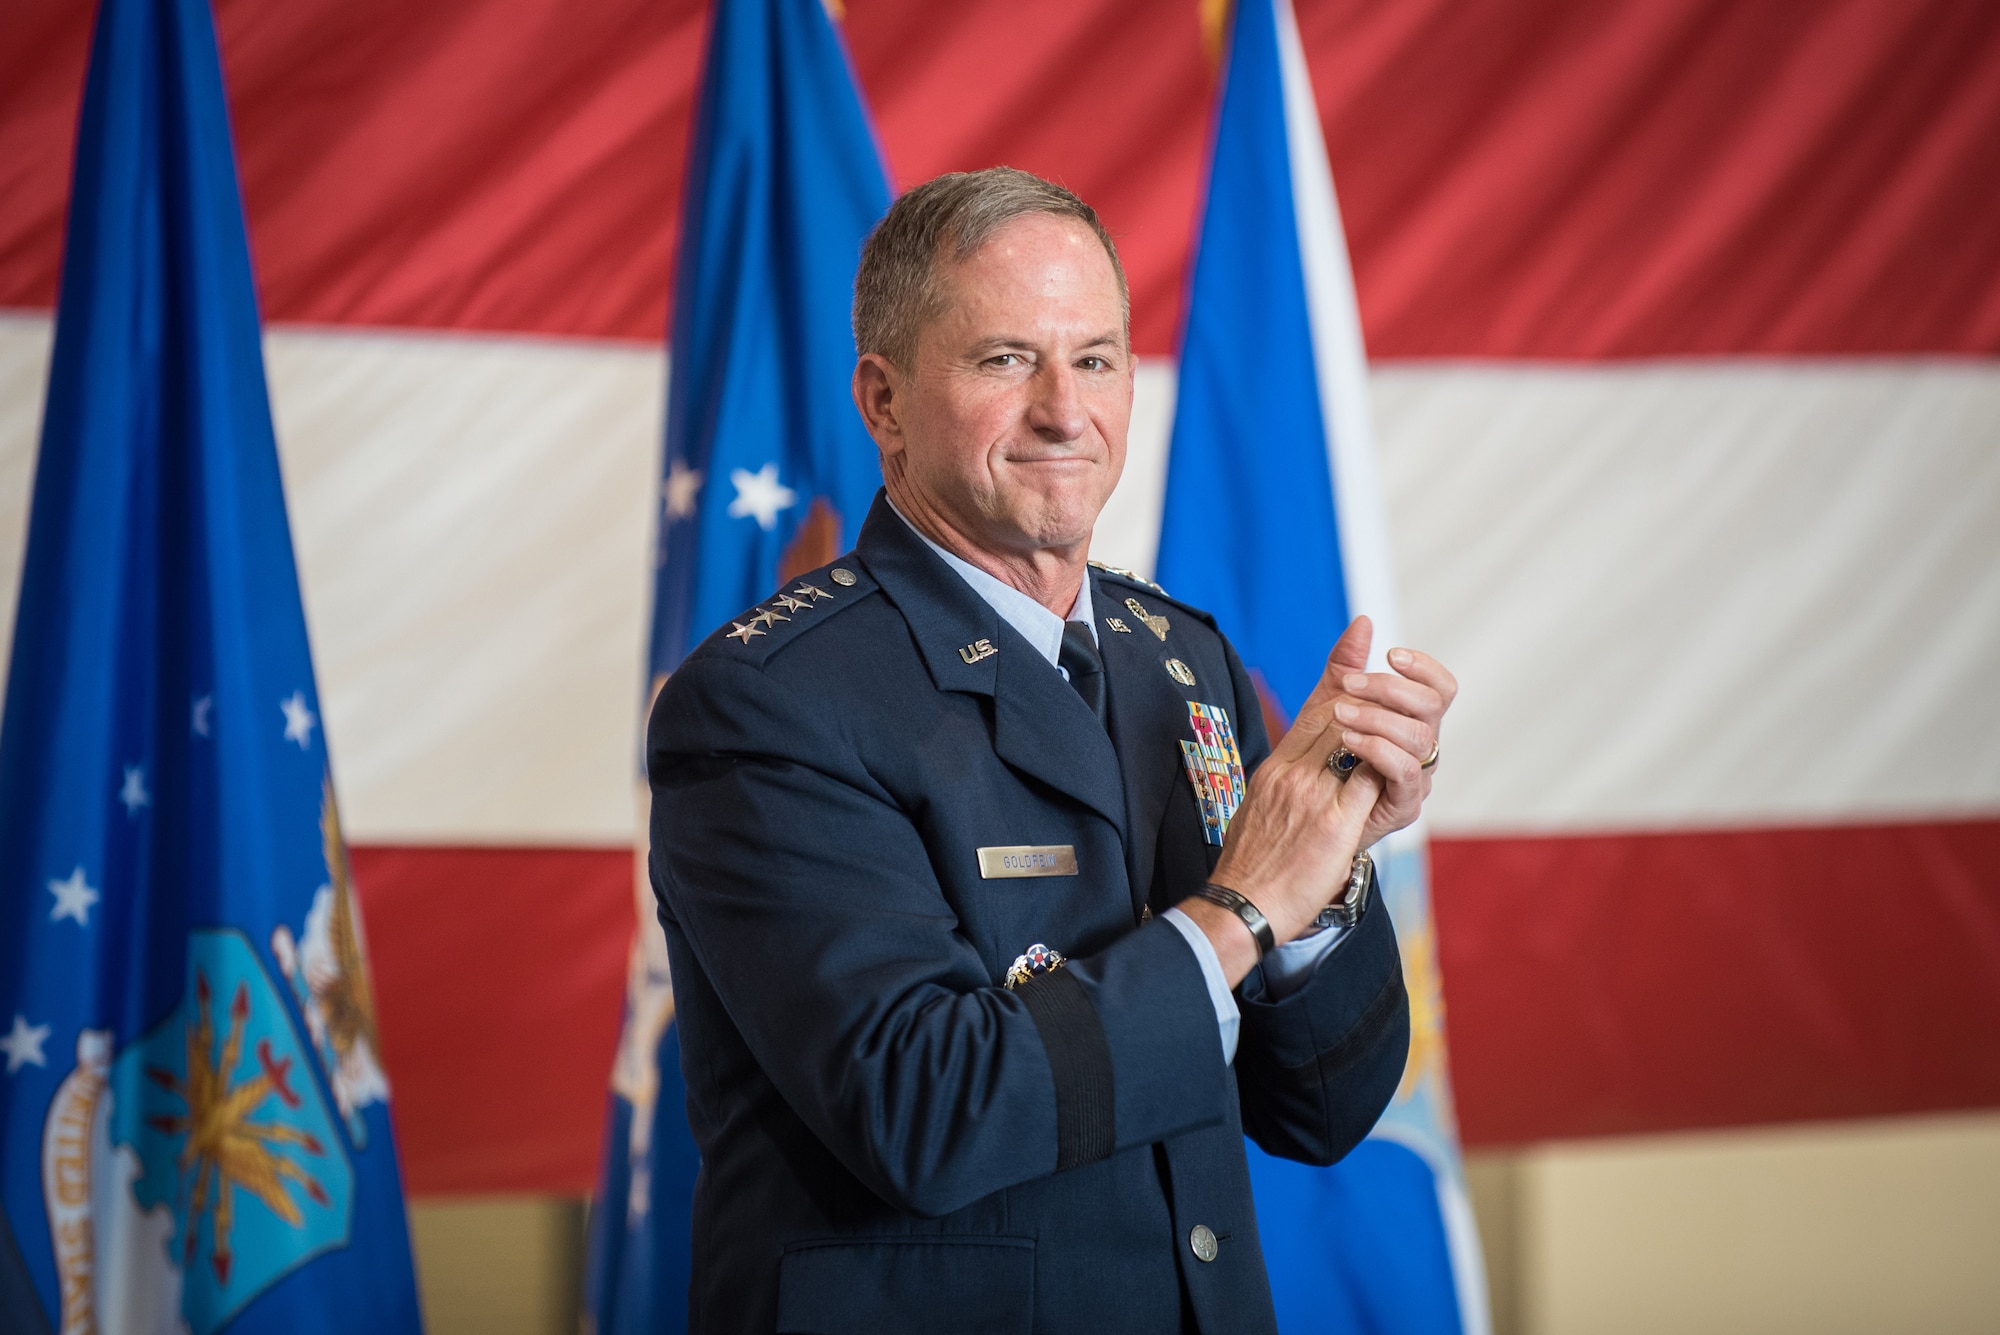 Air Force Chief of Staff Gen. David L. Goldfein applauds Lt. Col. John "J.T." Hourigan during a ceremony to award the Distinguished Flying Cross to Hourigan at the Kentucky Air National Guard Base in Louisville, Ky., Aug. 10, 2019. The 123rd Airlift Wing pilot earned the medal for decisive action following a catastrophic mechanical failure while flying a C-130 Hercules during a routine training sortie, saving the lives of six crew members and a $30 million aircraft. (U.S. Air National Guard photo by Lt. Col. Dale Greer)